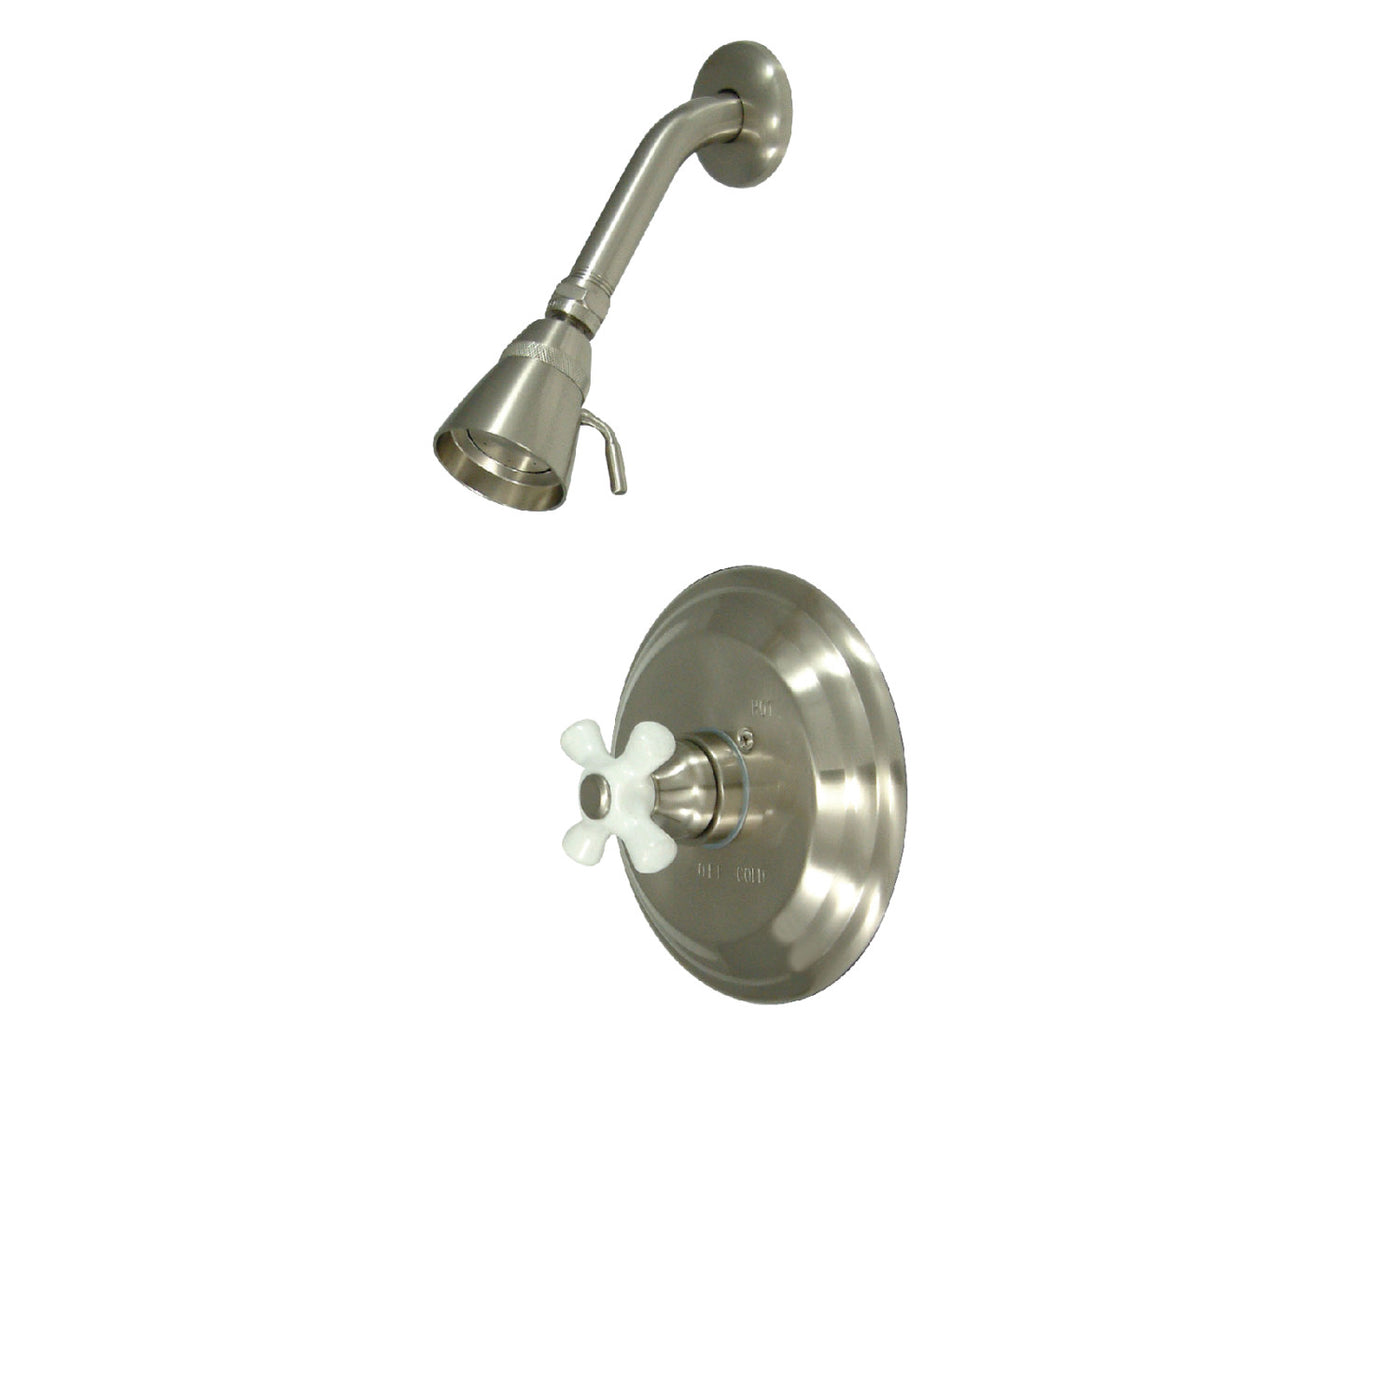 Elements of Design EB3638PXSO Pressure Balanced Shower Faucet, Brushed Nickel